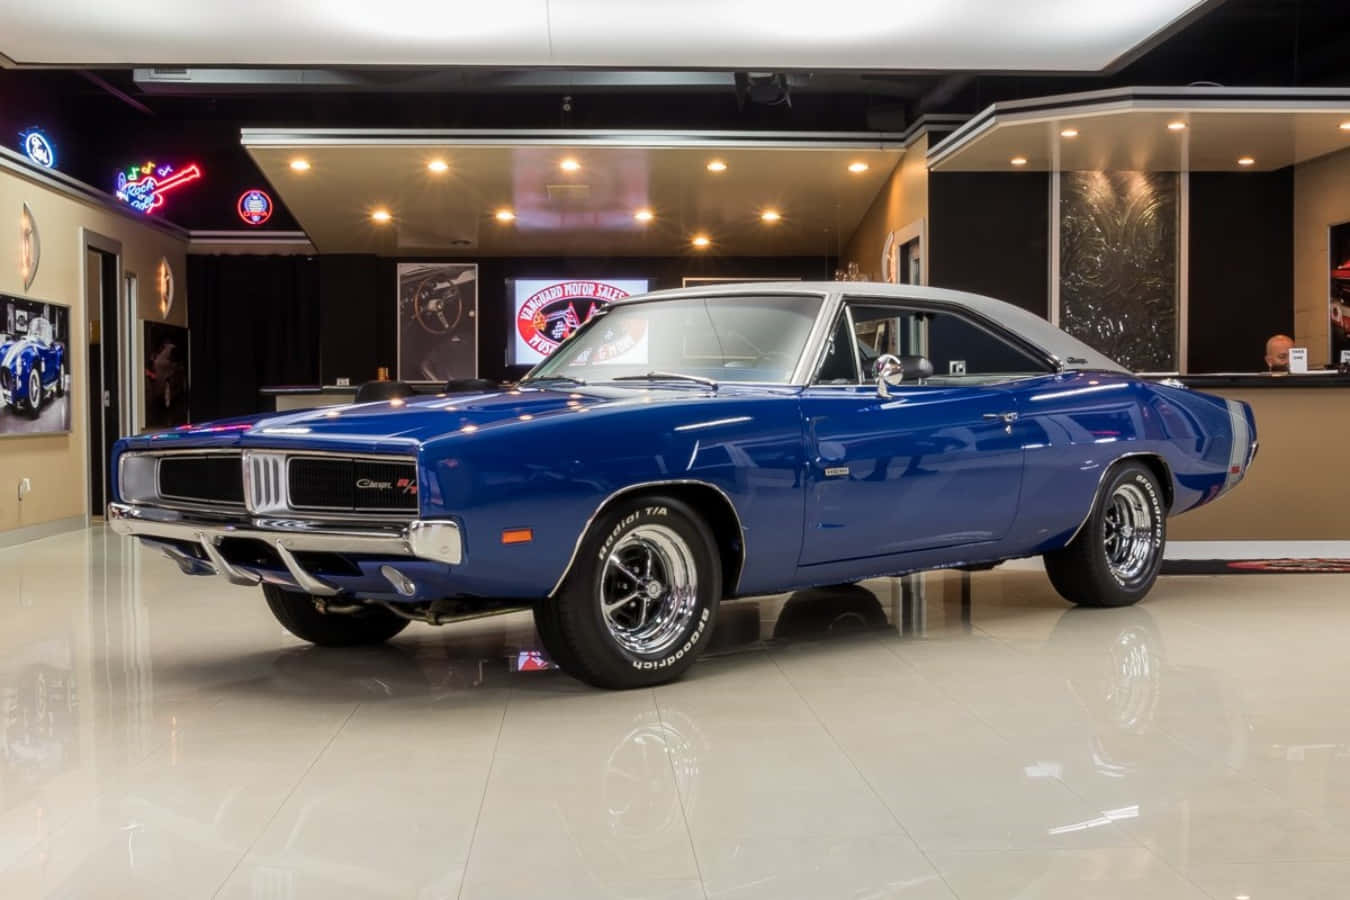 A Blue Dodge Charger Is Parked In A Garage